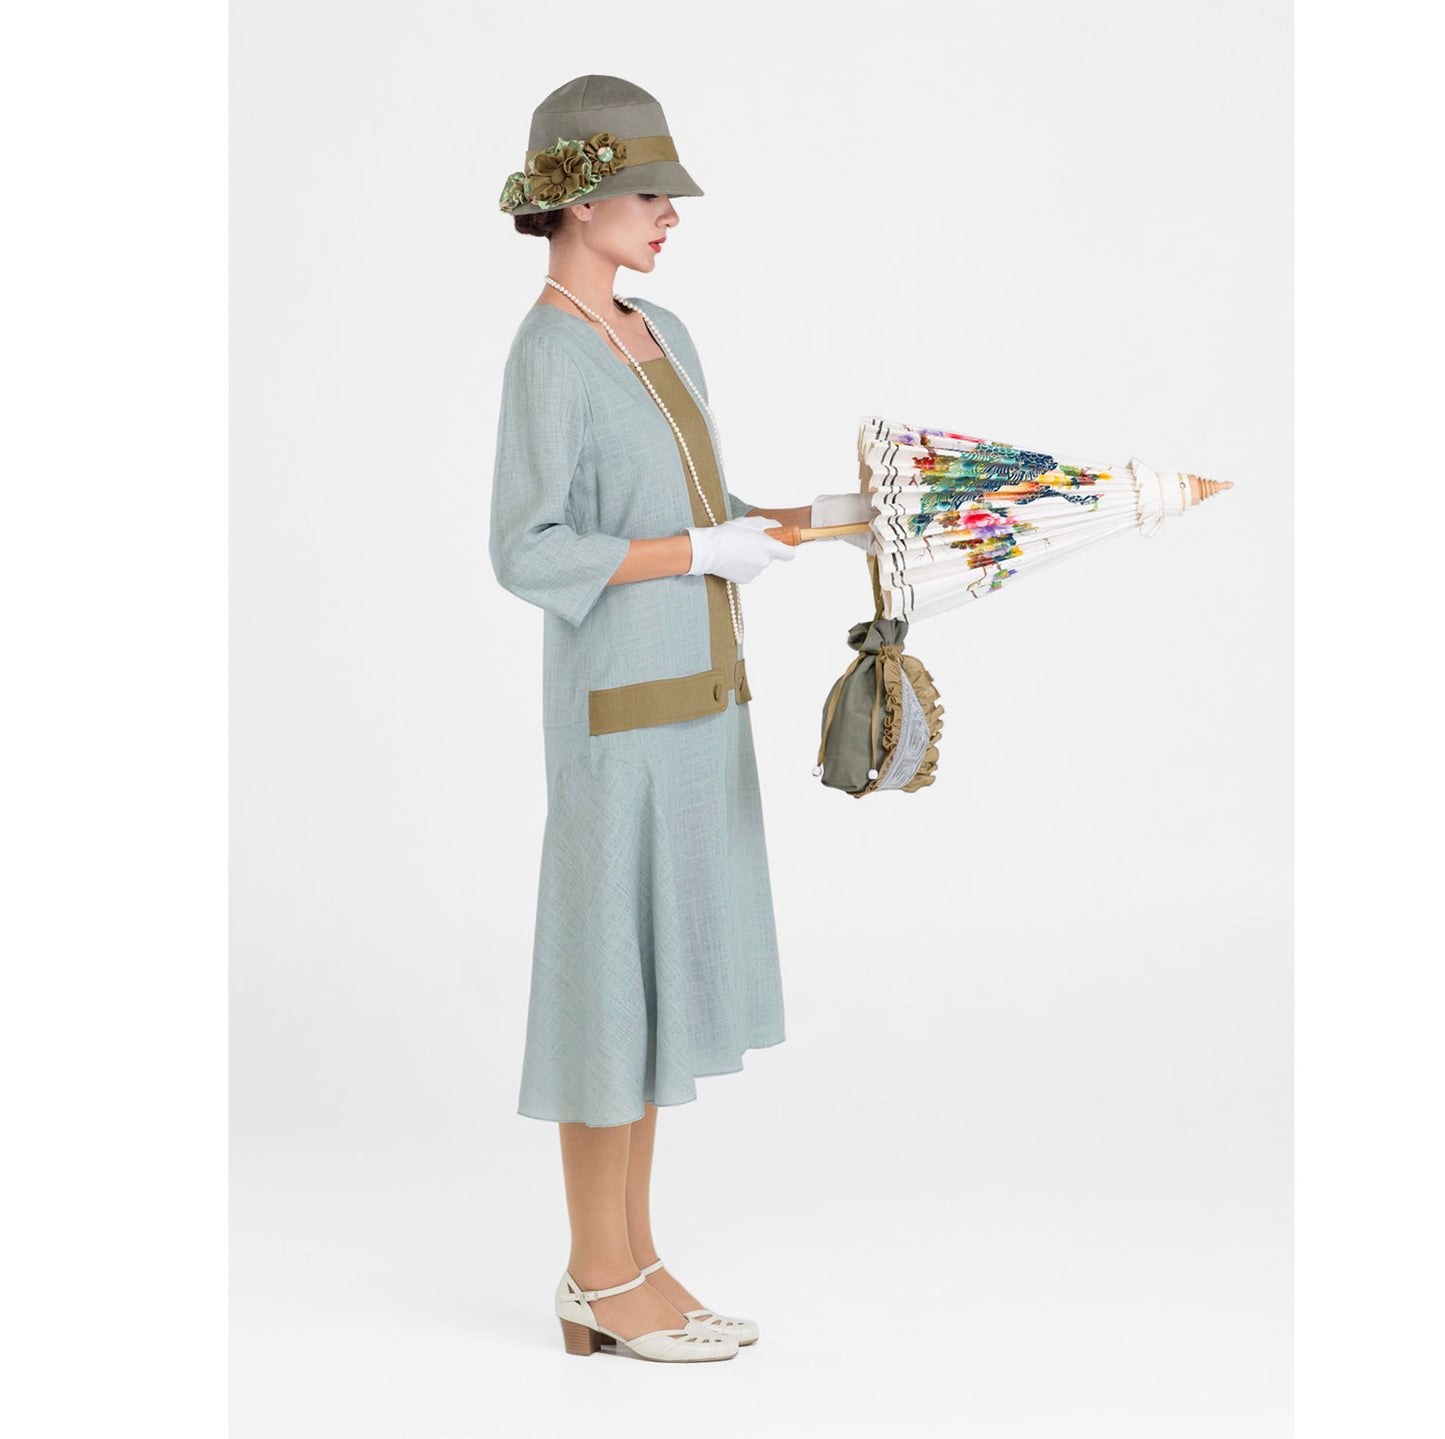 Great Gatsby linen dress in grey and olive with square neckline